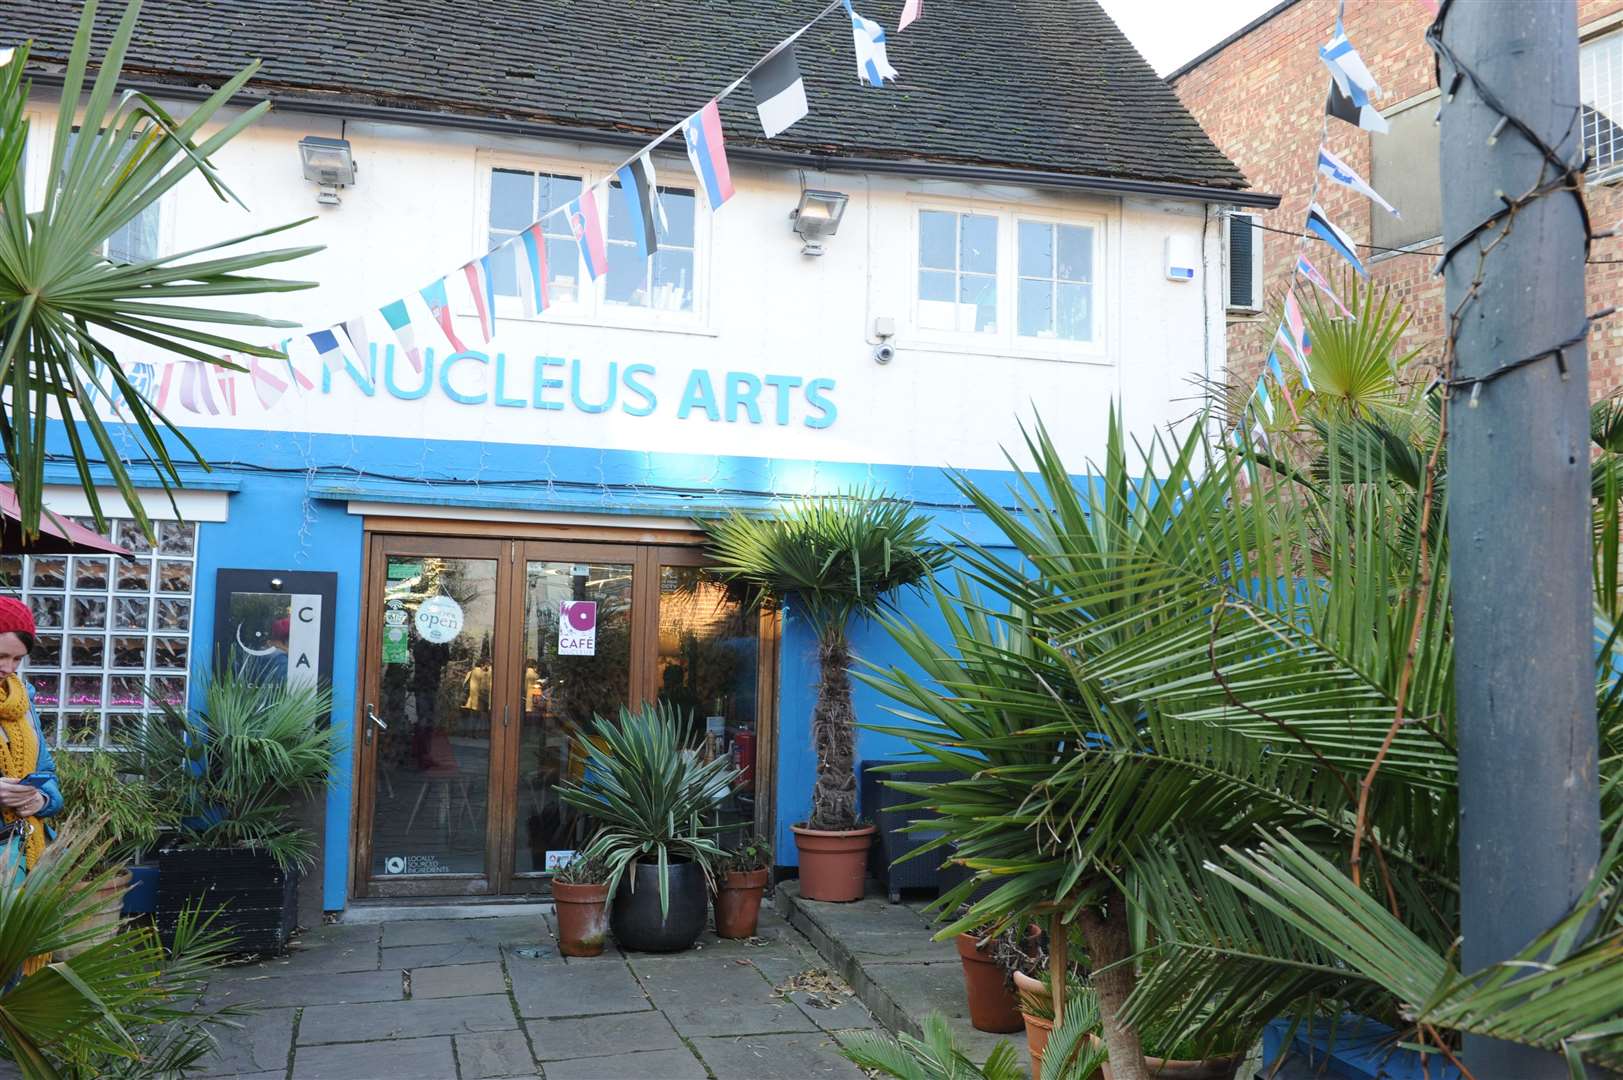 Nucleus Arts in High Street, Chatham